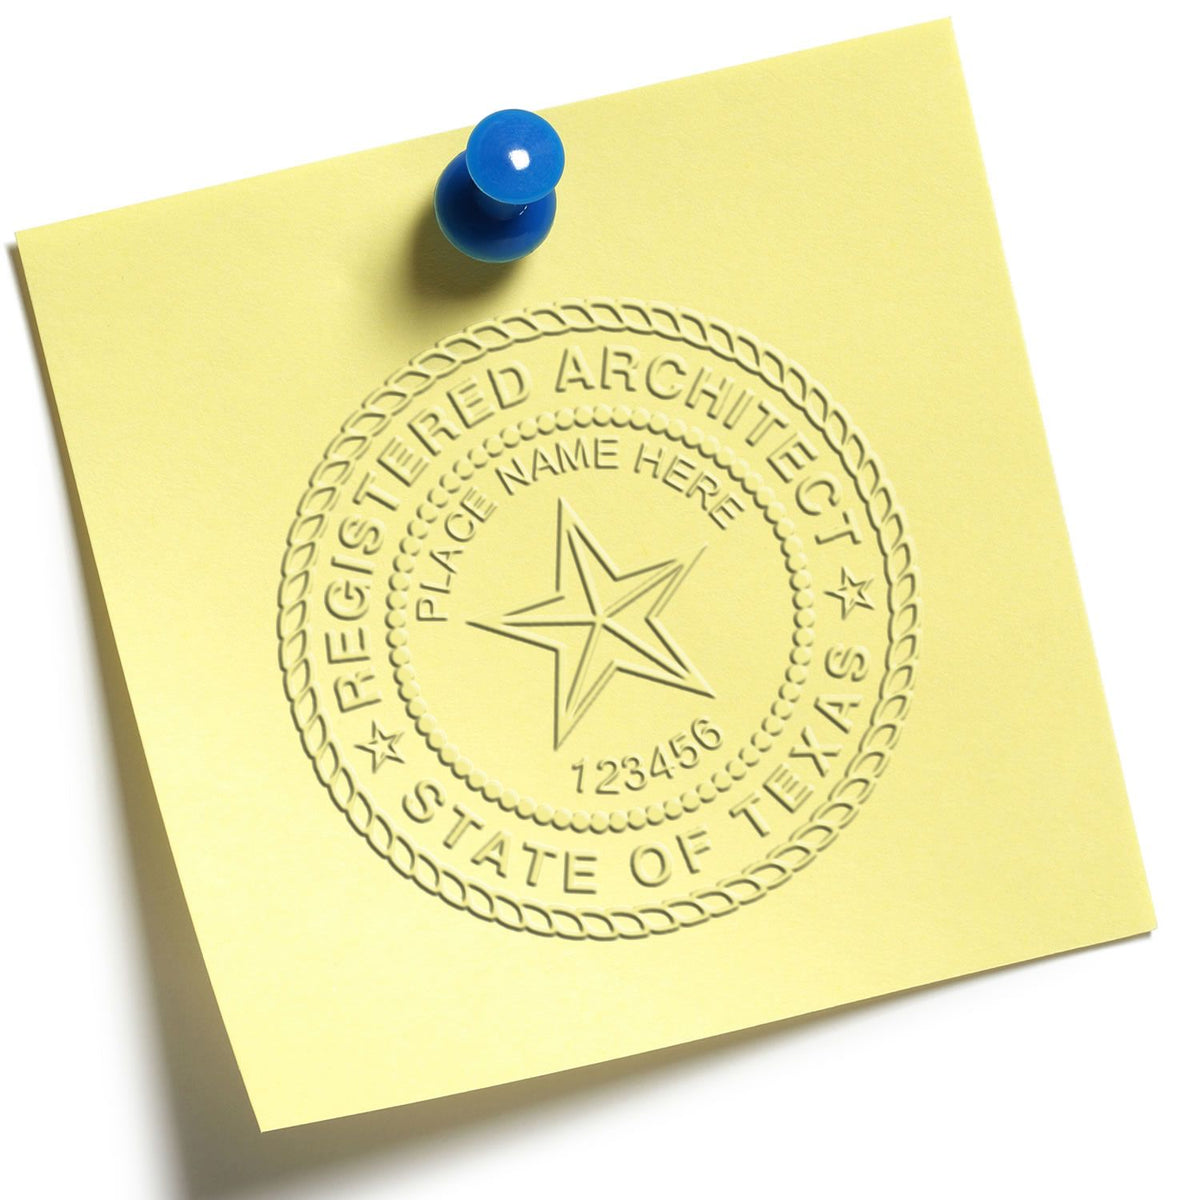 The Texas Desk Architect Embossing Seal stamp impression comes to life with a crisp, detailed photo on paper - showcasing true professional quality.